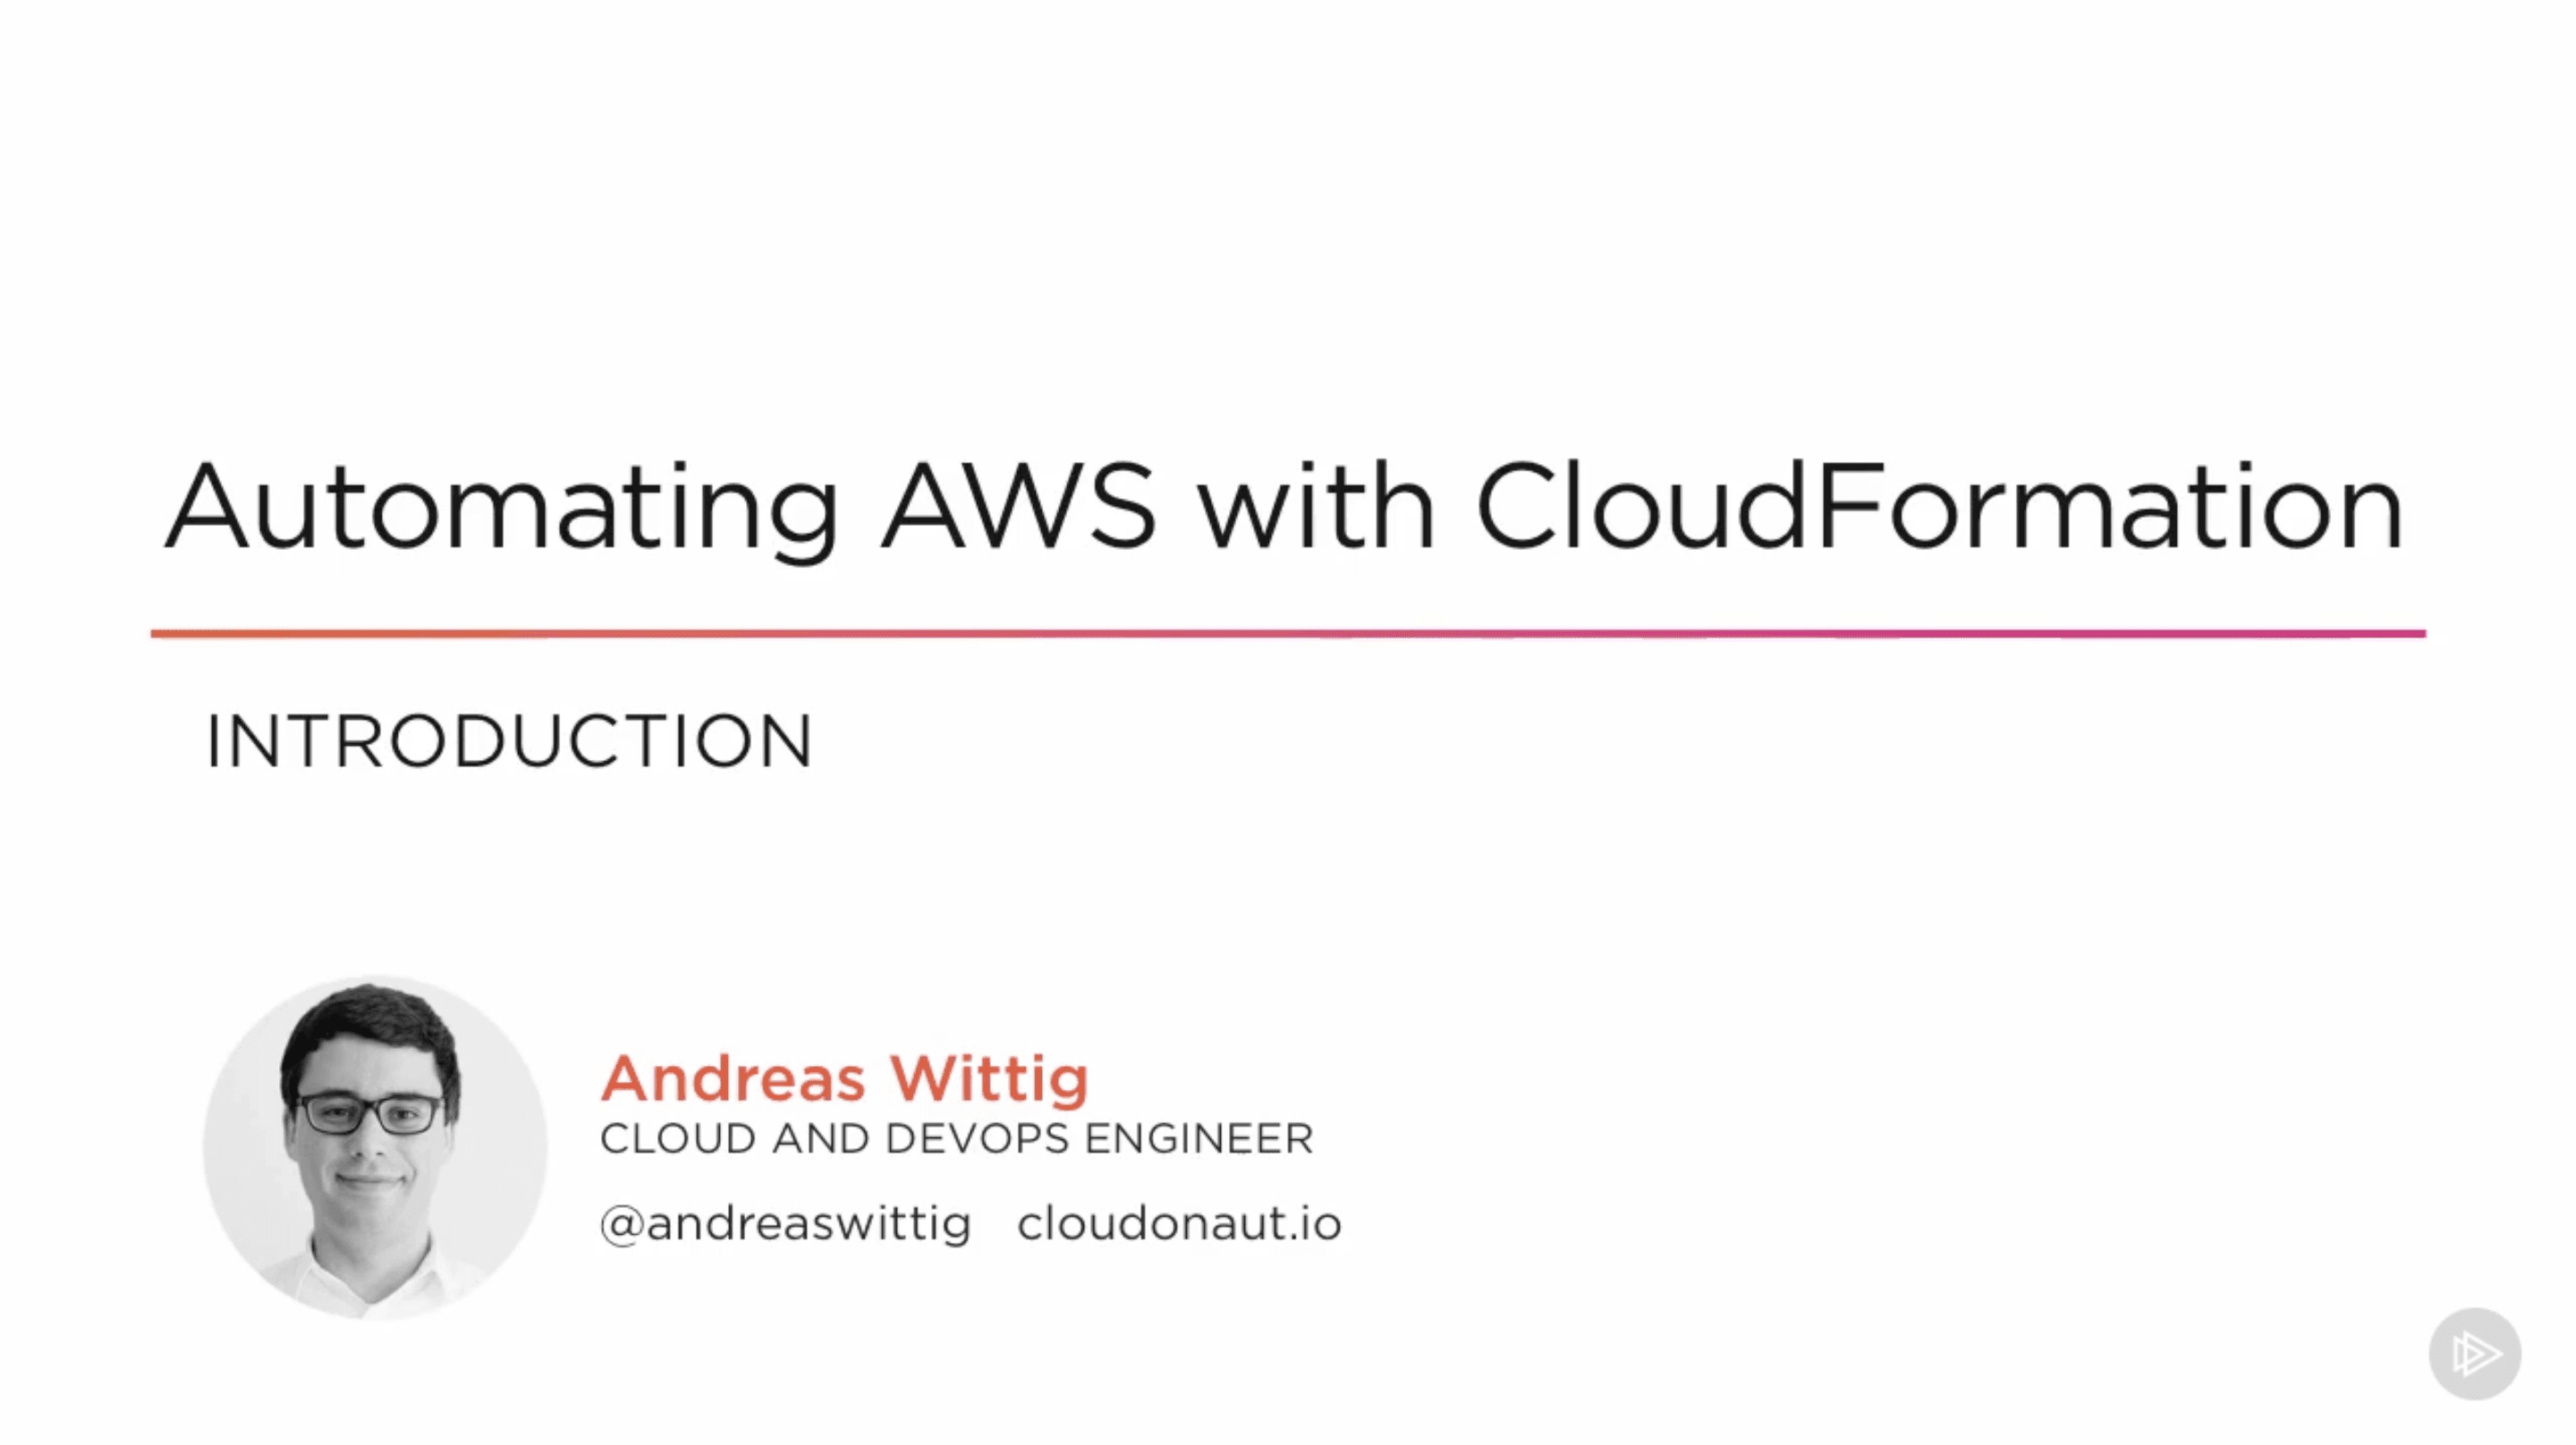 New Online Training - Automating AWS with CloudFormation